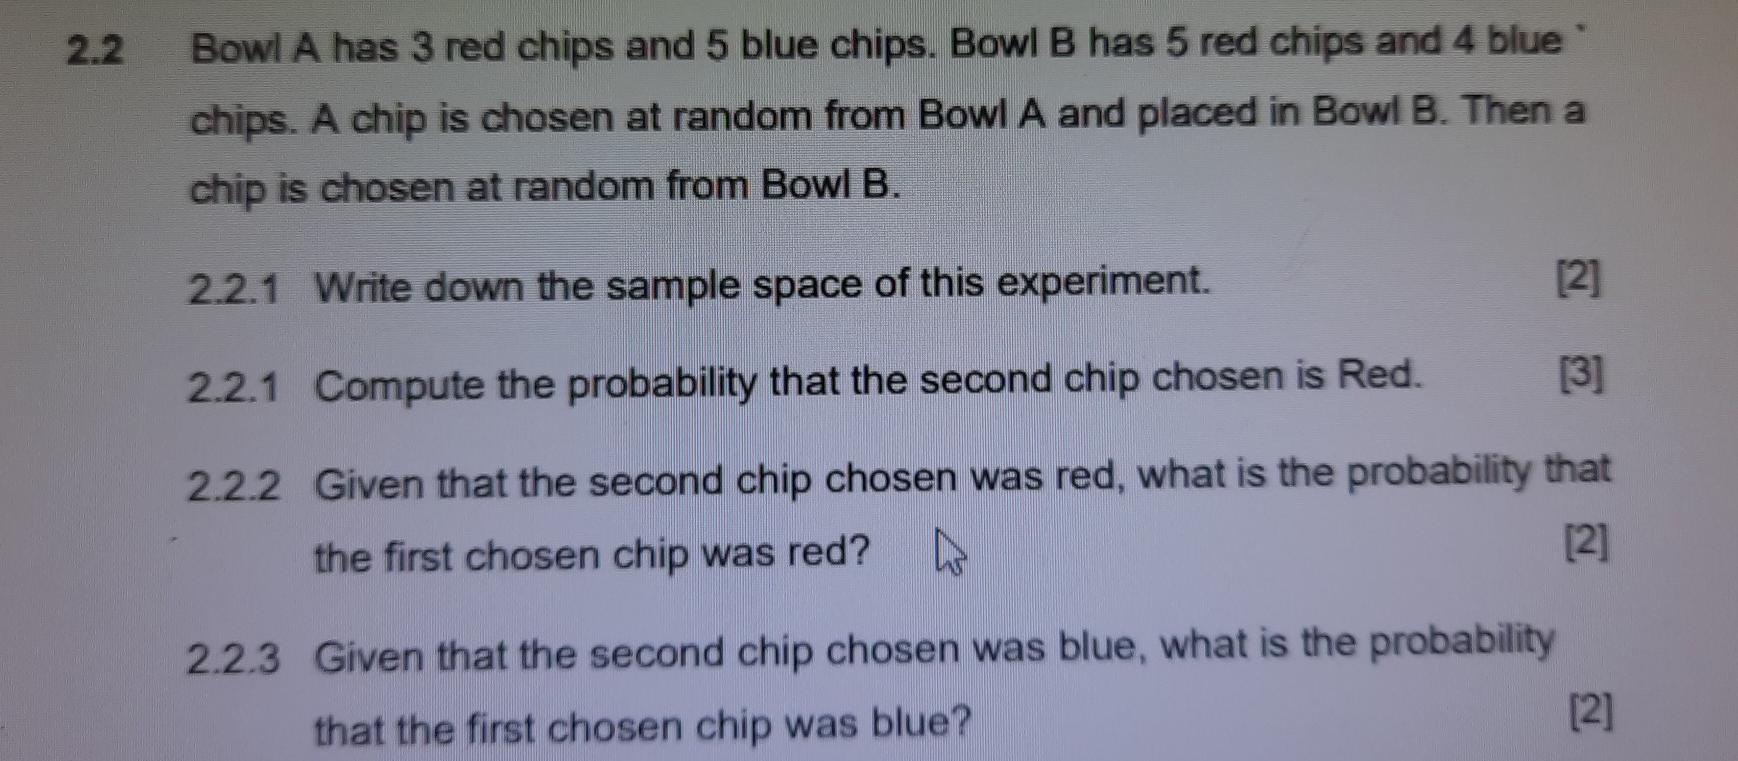 Bowl A has 3 red chips and 5 blue chips. Bowl B has 5 red chips and 4 blue chips. A chip is chosen...